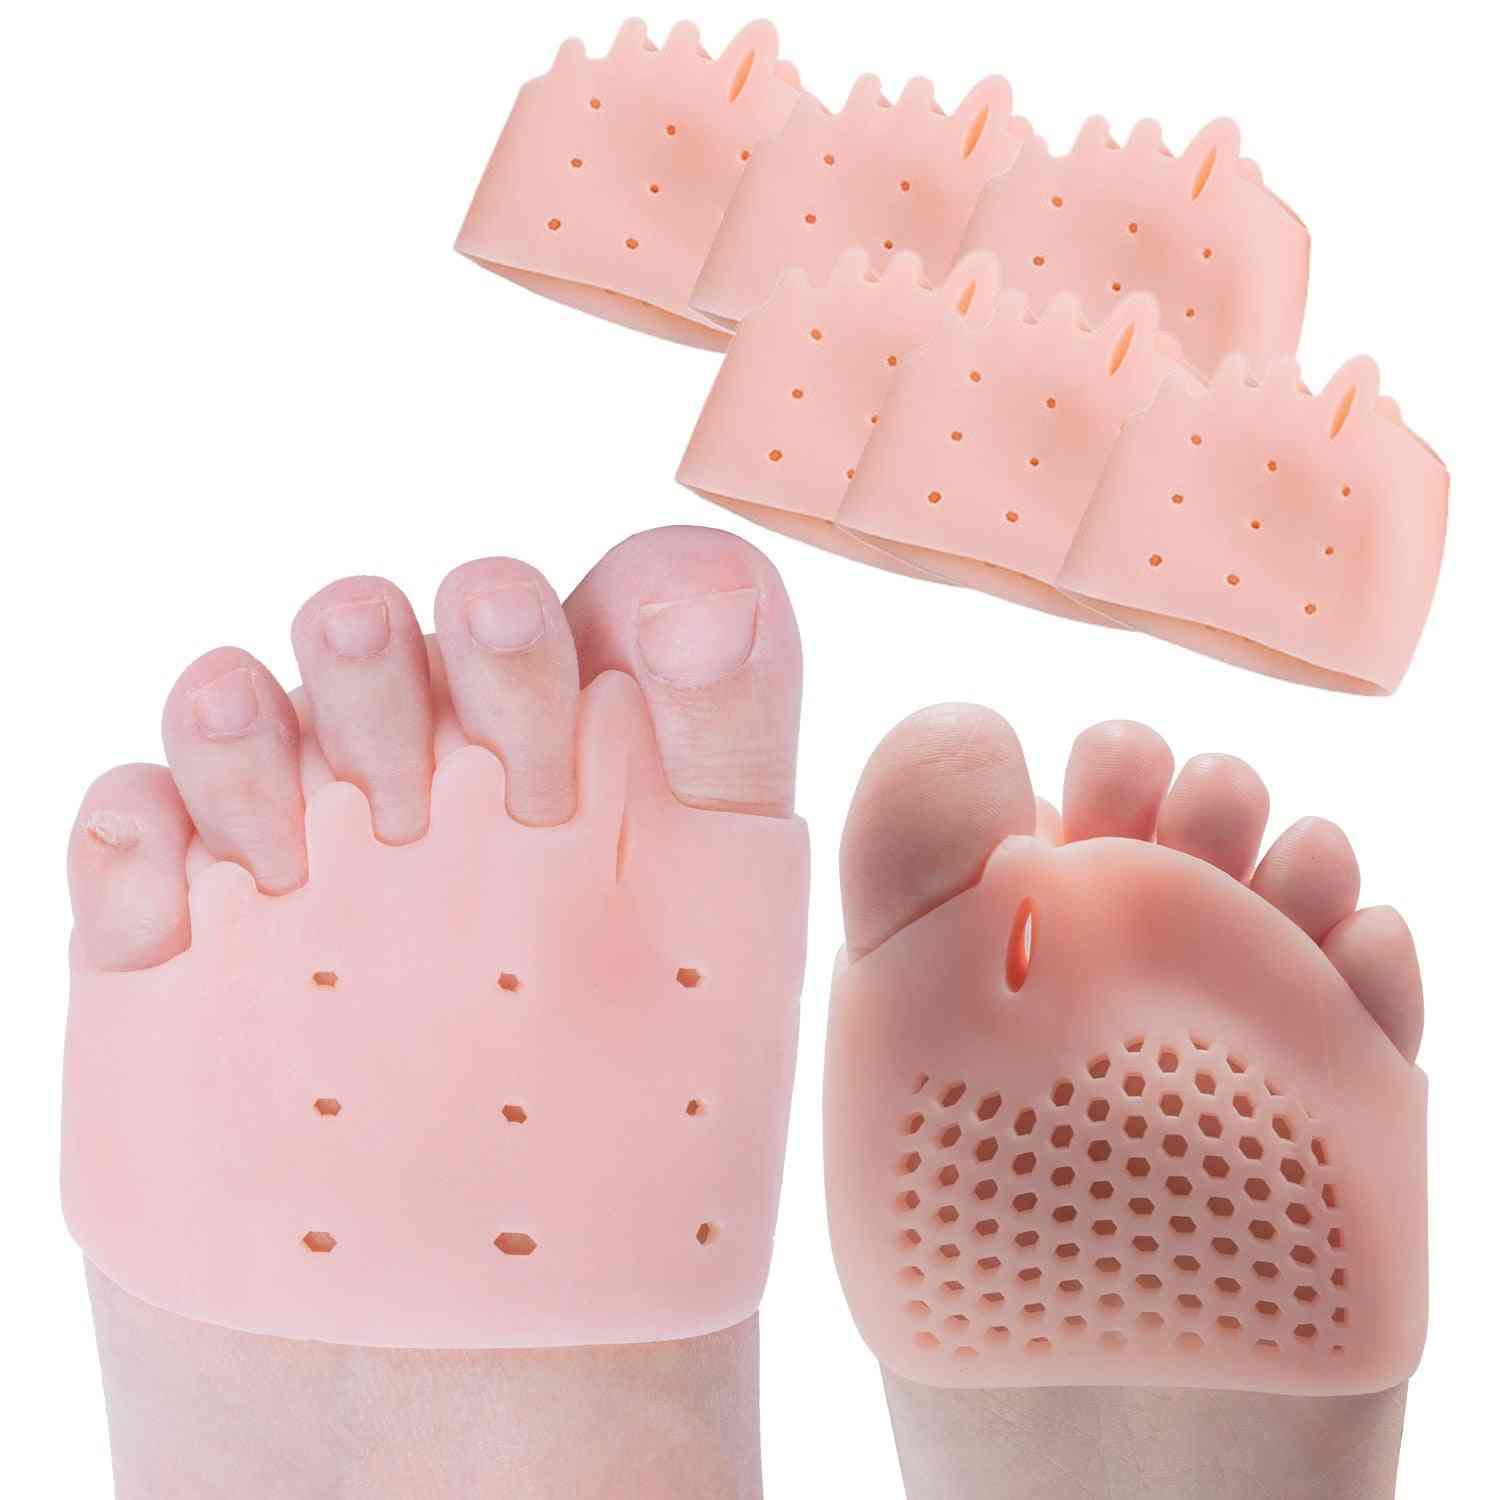 Forefoot Pads Five-hole Honeycomb Toe Separator Soft Gel Pain Relief